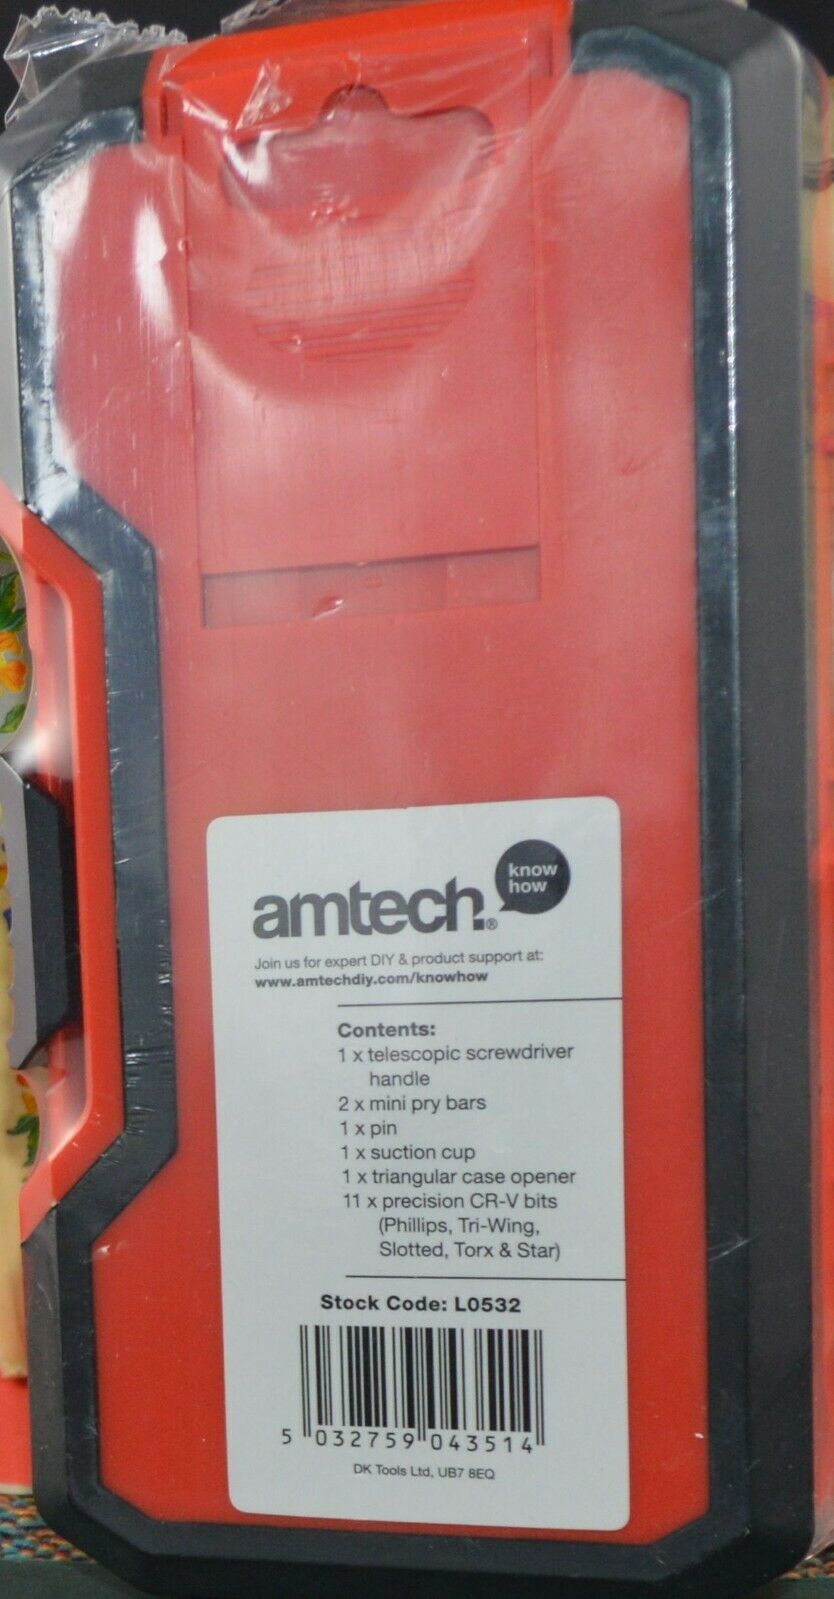 NEW AMTECH 17 PIECE PRECISION PHONE AND COMPUTER REPAIR TOOL SET - TMD167207